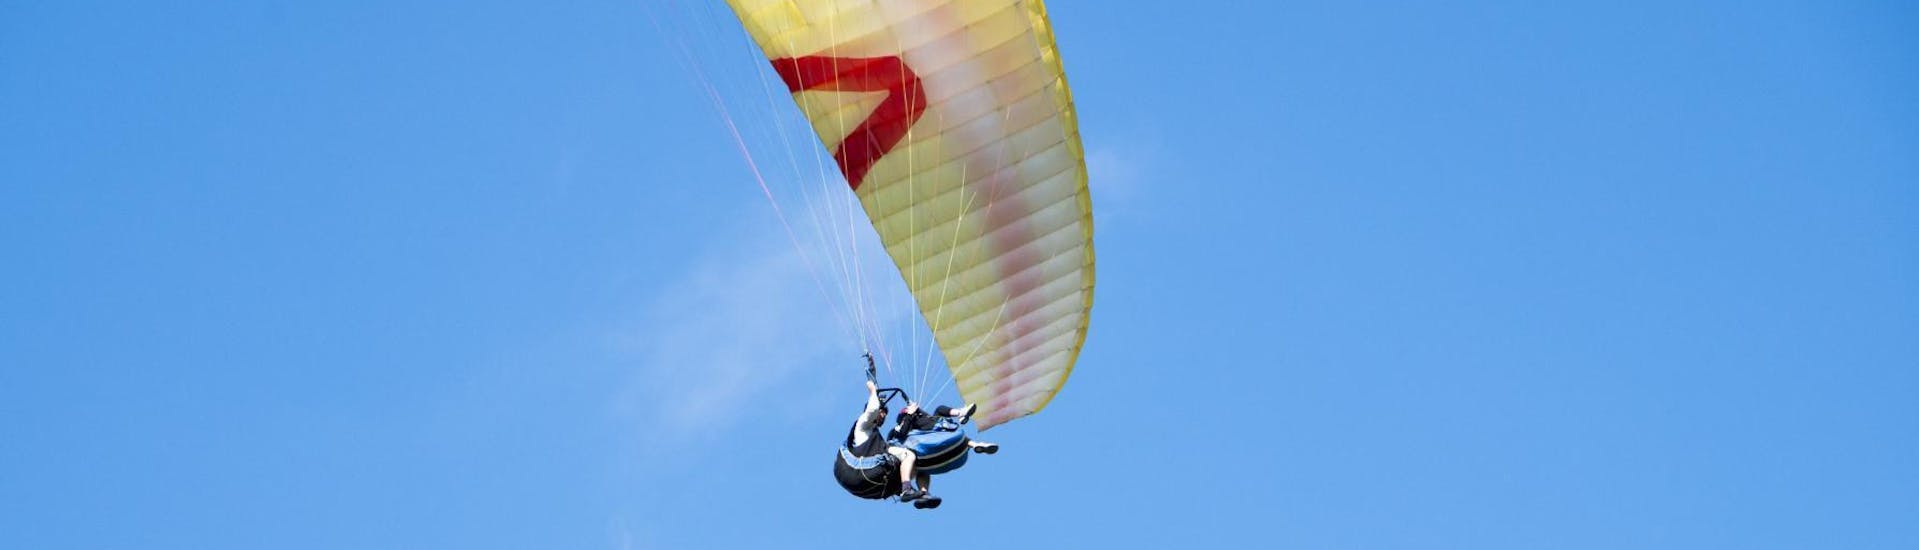 A participant enjoying a paragliding experience over Kravec Mountainduring a thermic tandem paragliding activity with Sky Riders Paragliding Croatia.